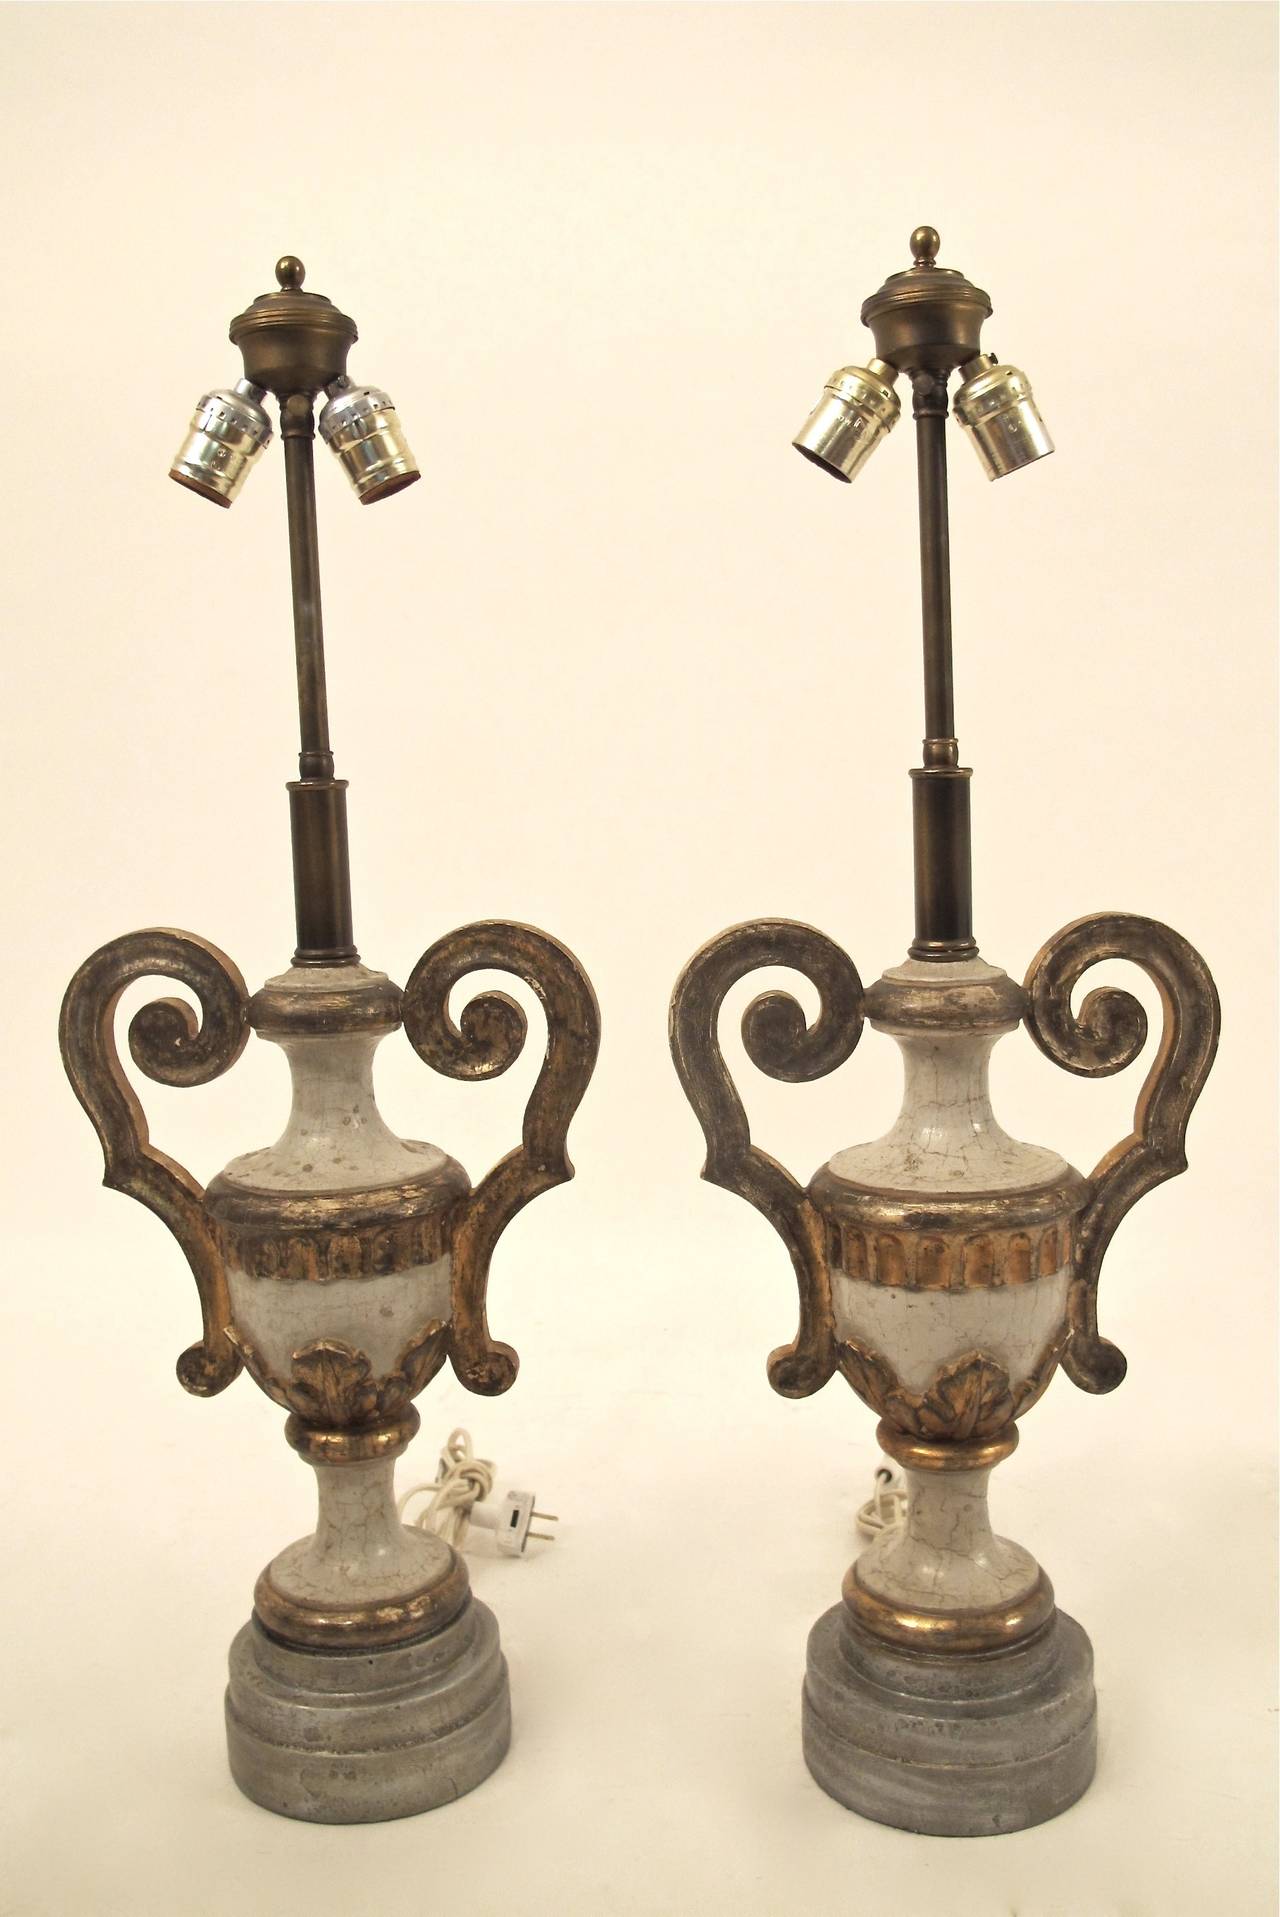 Carved Pair of 18th Century Italian Urn Lamps